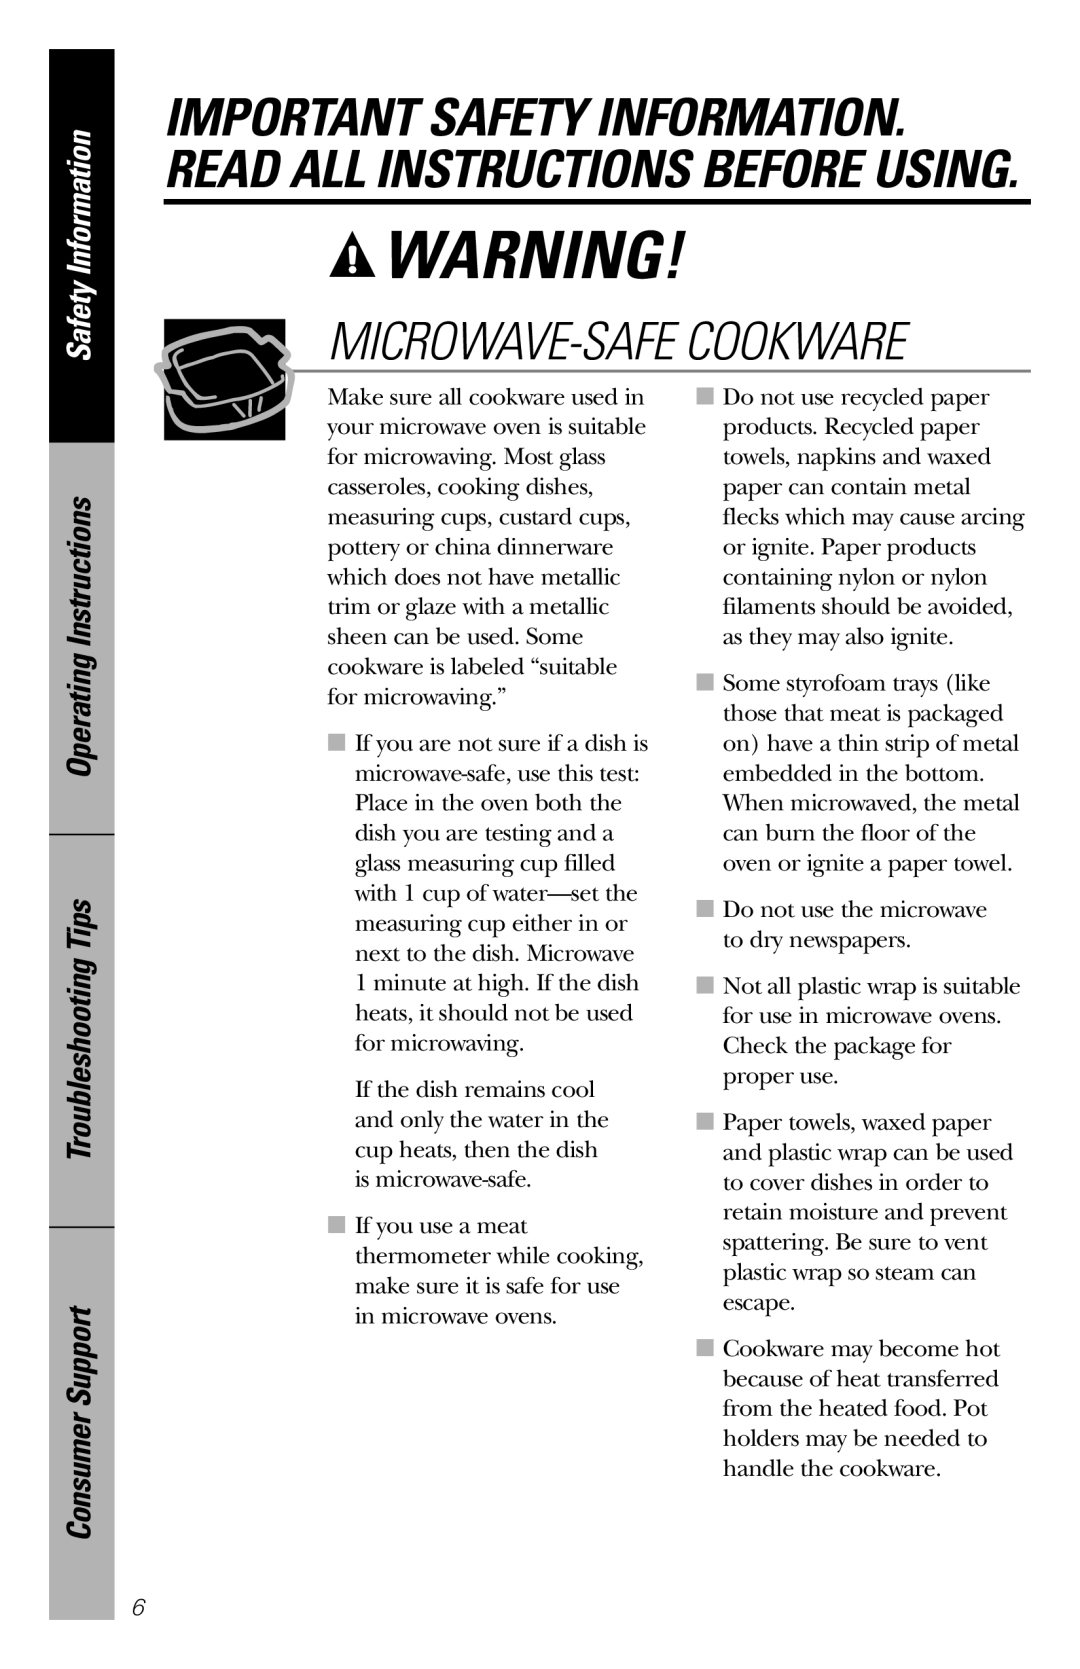 GE WES1130 Microwave-Safe Cookware, Operating Instructions Troubleshooting Tips Consumer Support, Safety Information 